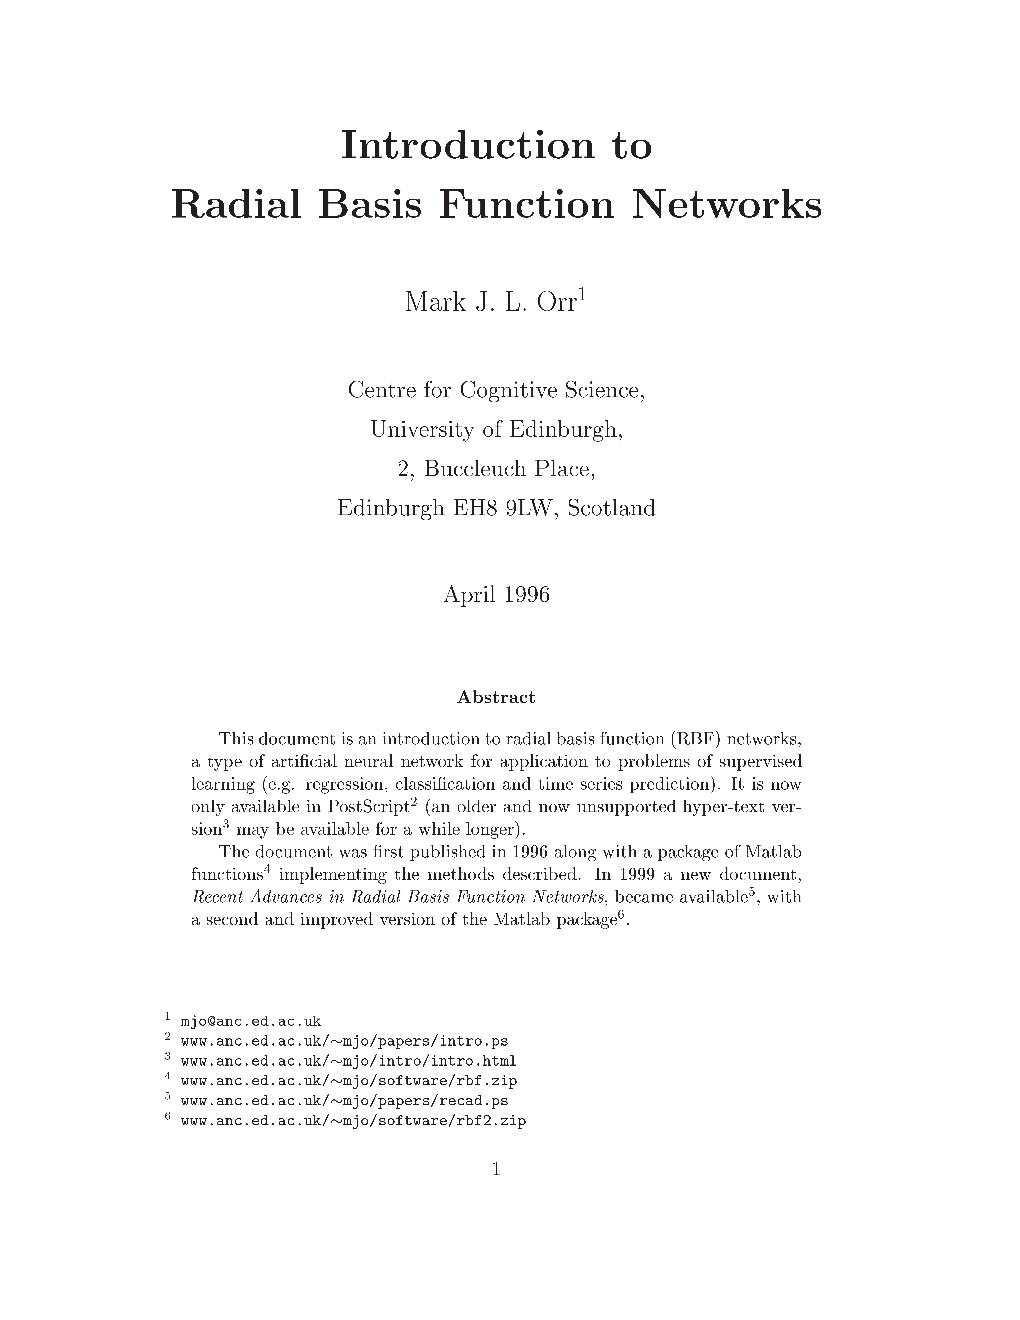 Introduction to Radial Basis Function Networks